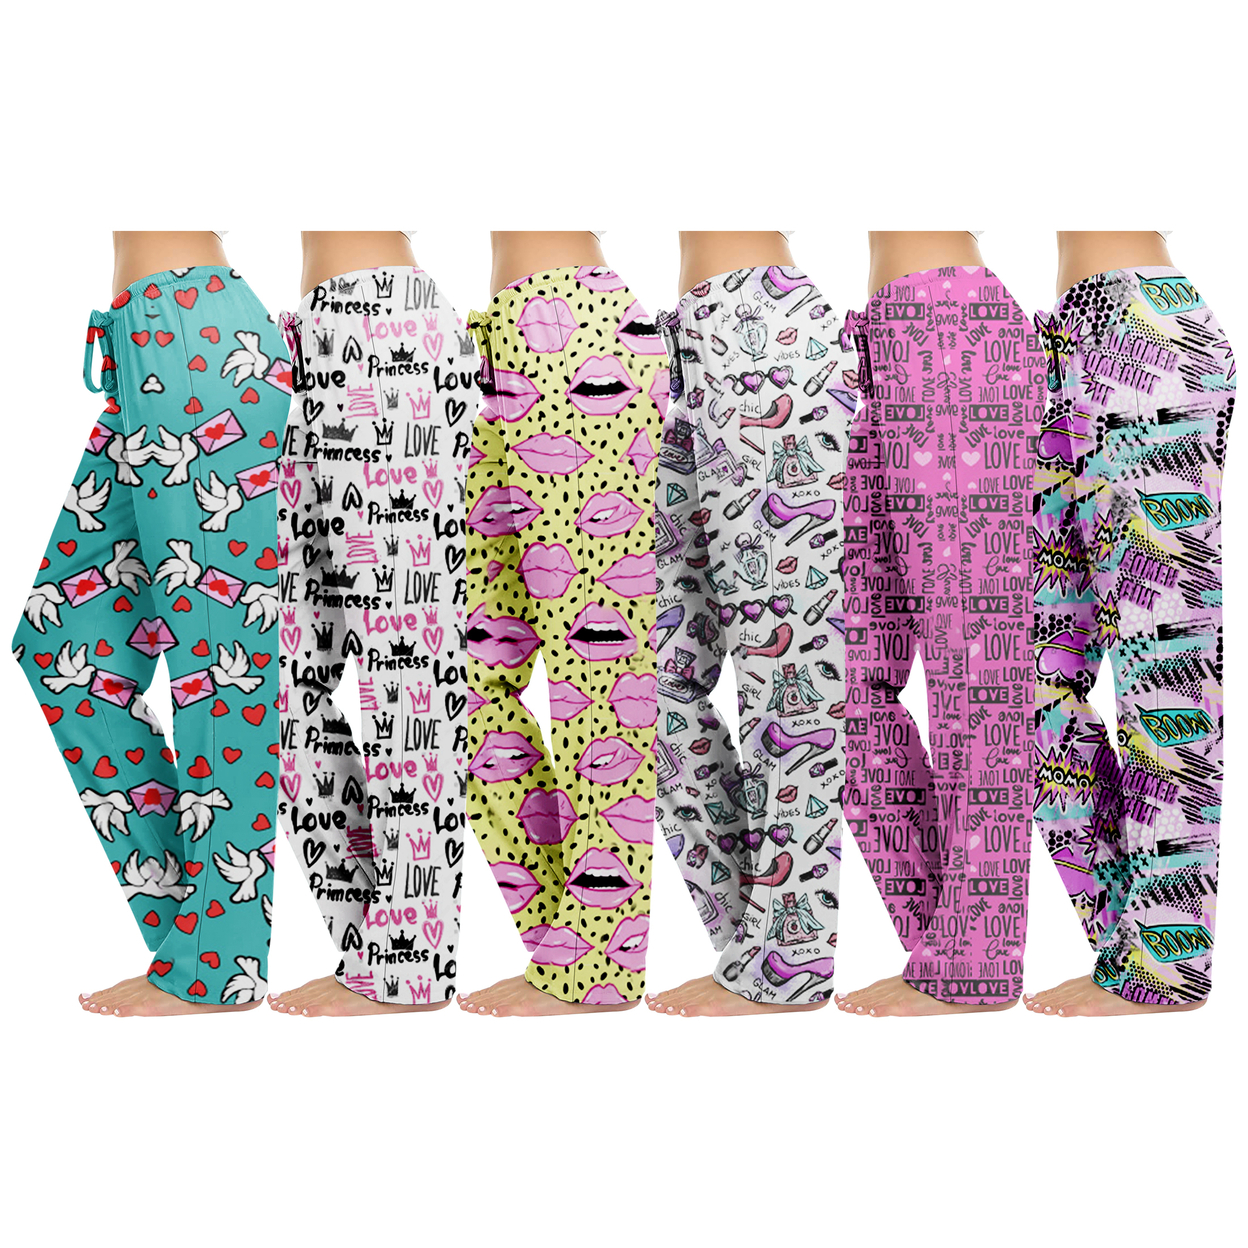 3-Pack: Women's Casual Fun Printed Lightweight Lounge Terry Knit Pajama Bottom Pants - Large, Shapes